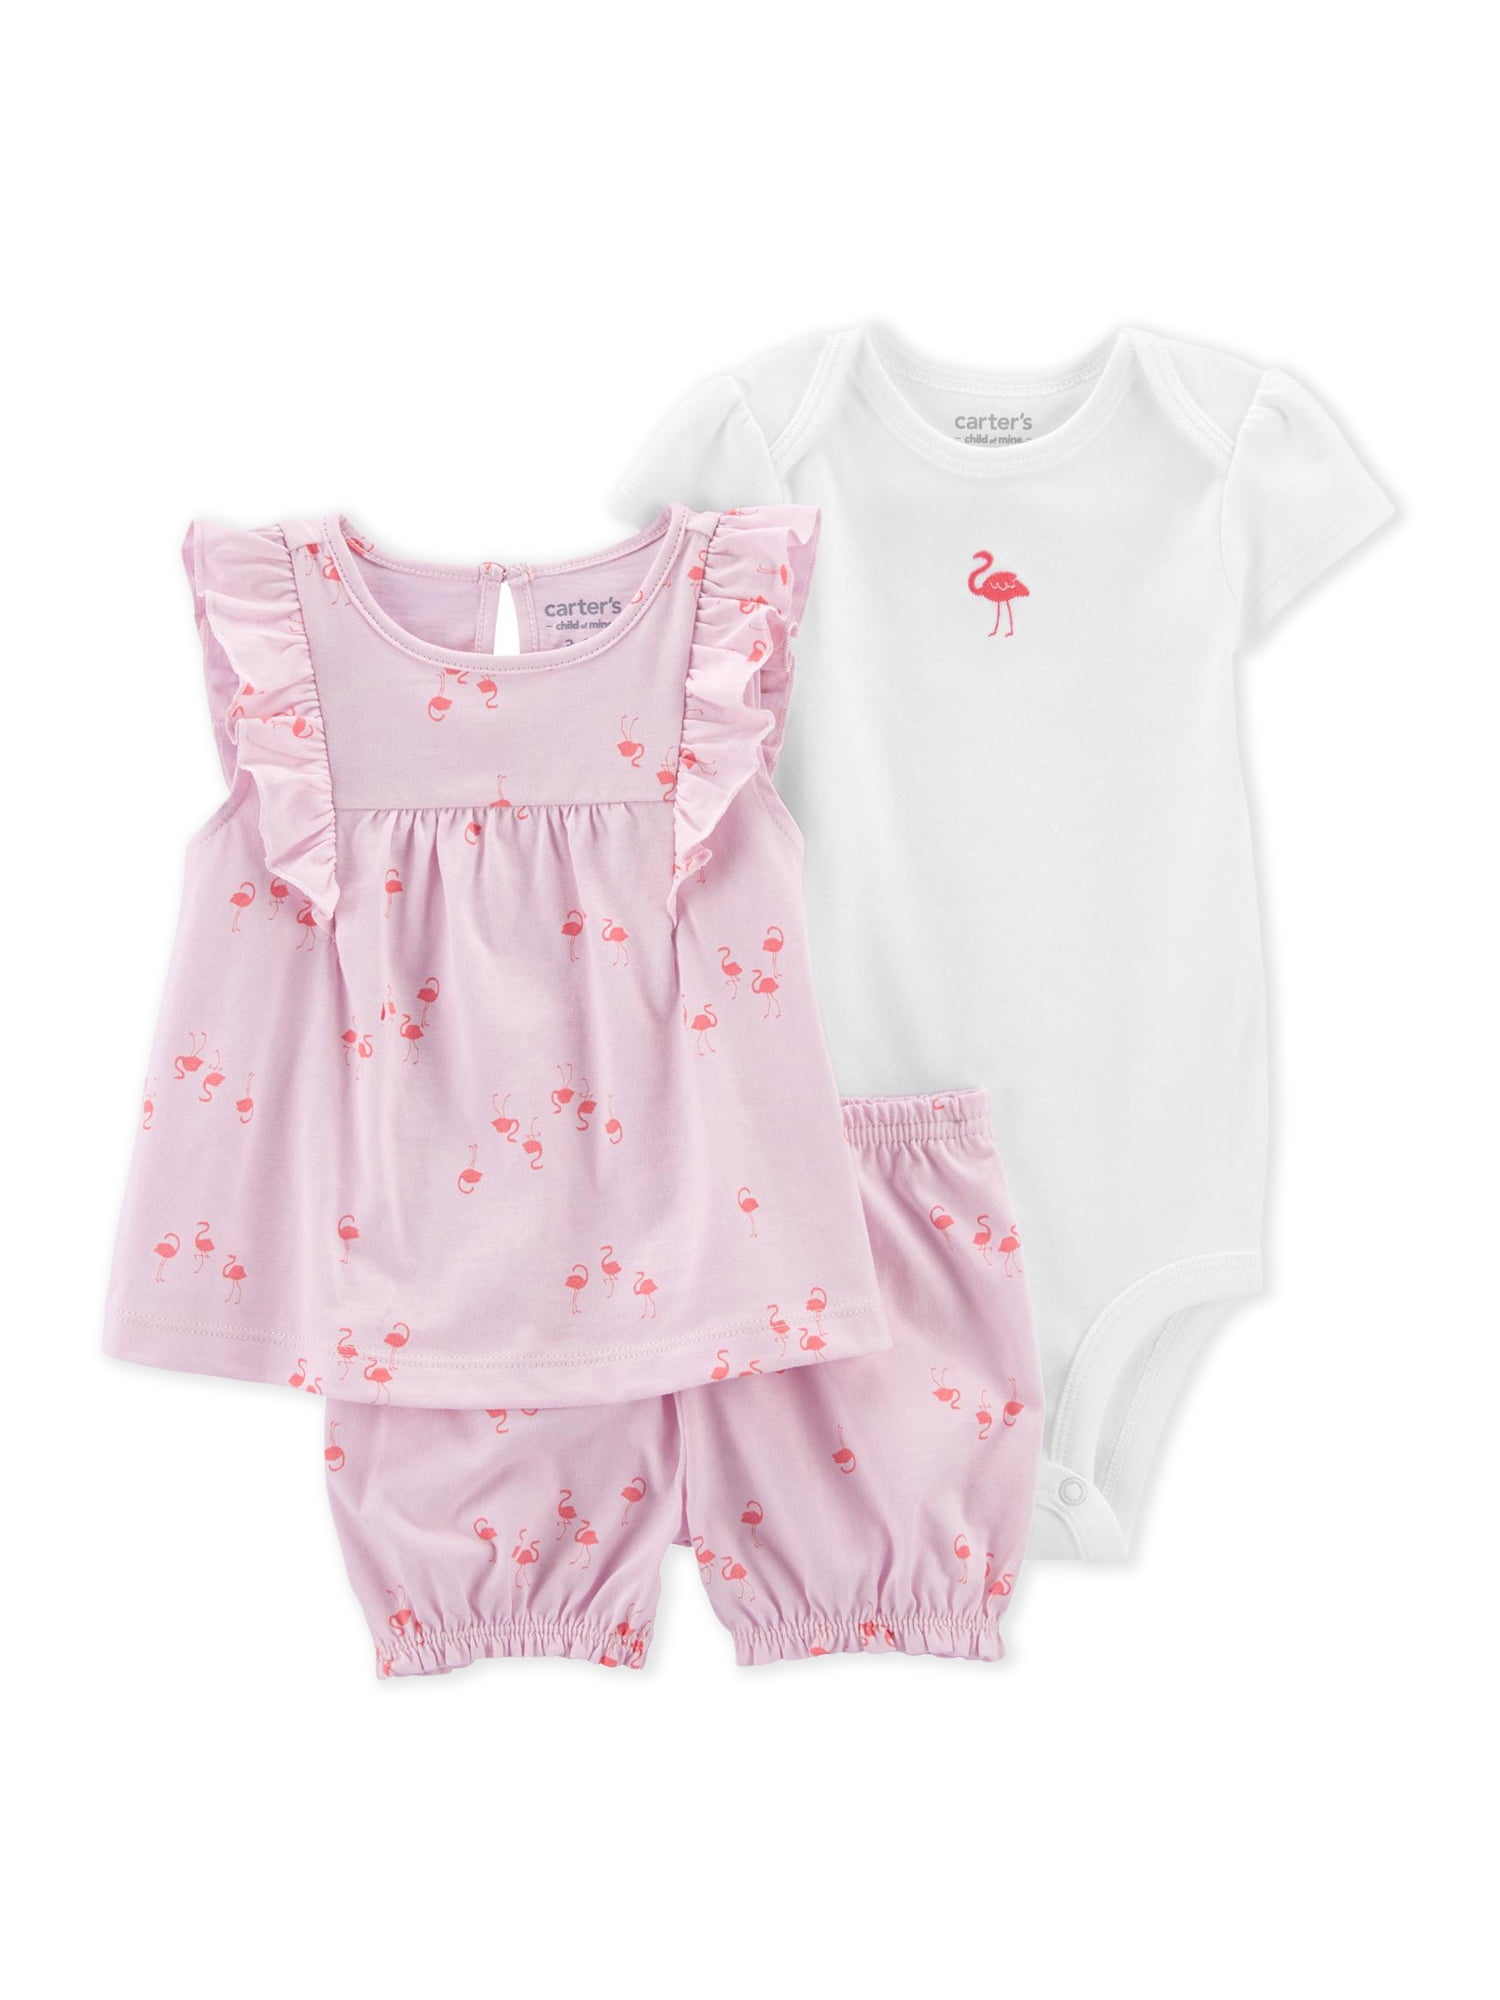 Carter's Child of Mine Baby Girl Outfit Set, 3-Piece, Sizes 0-24 Months 